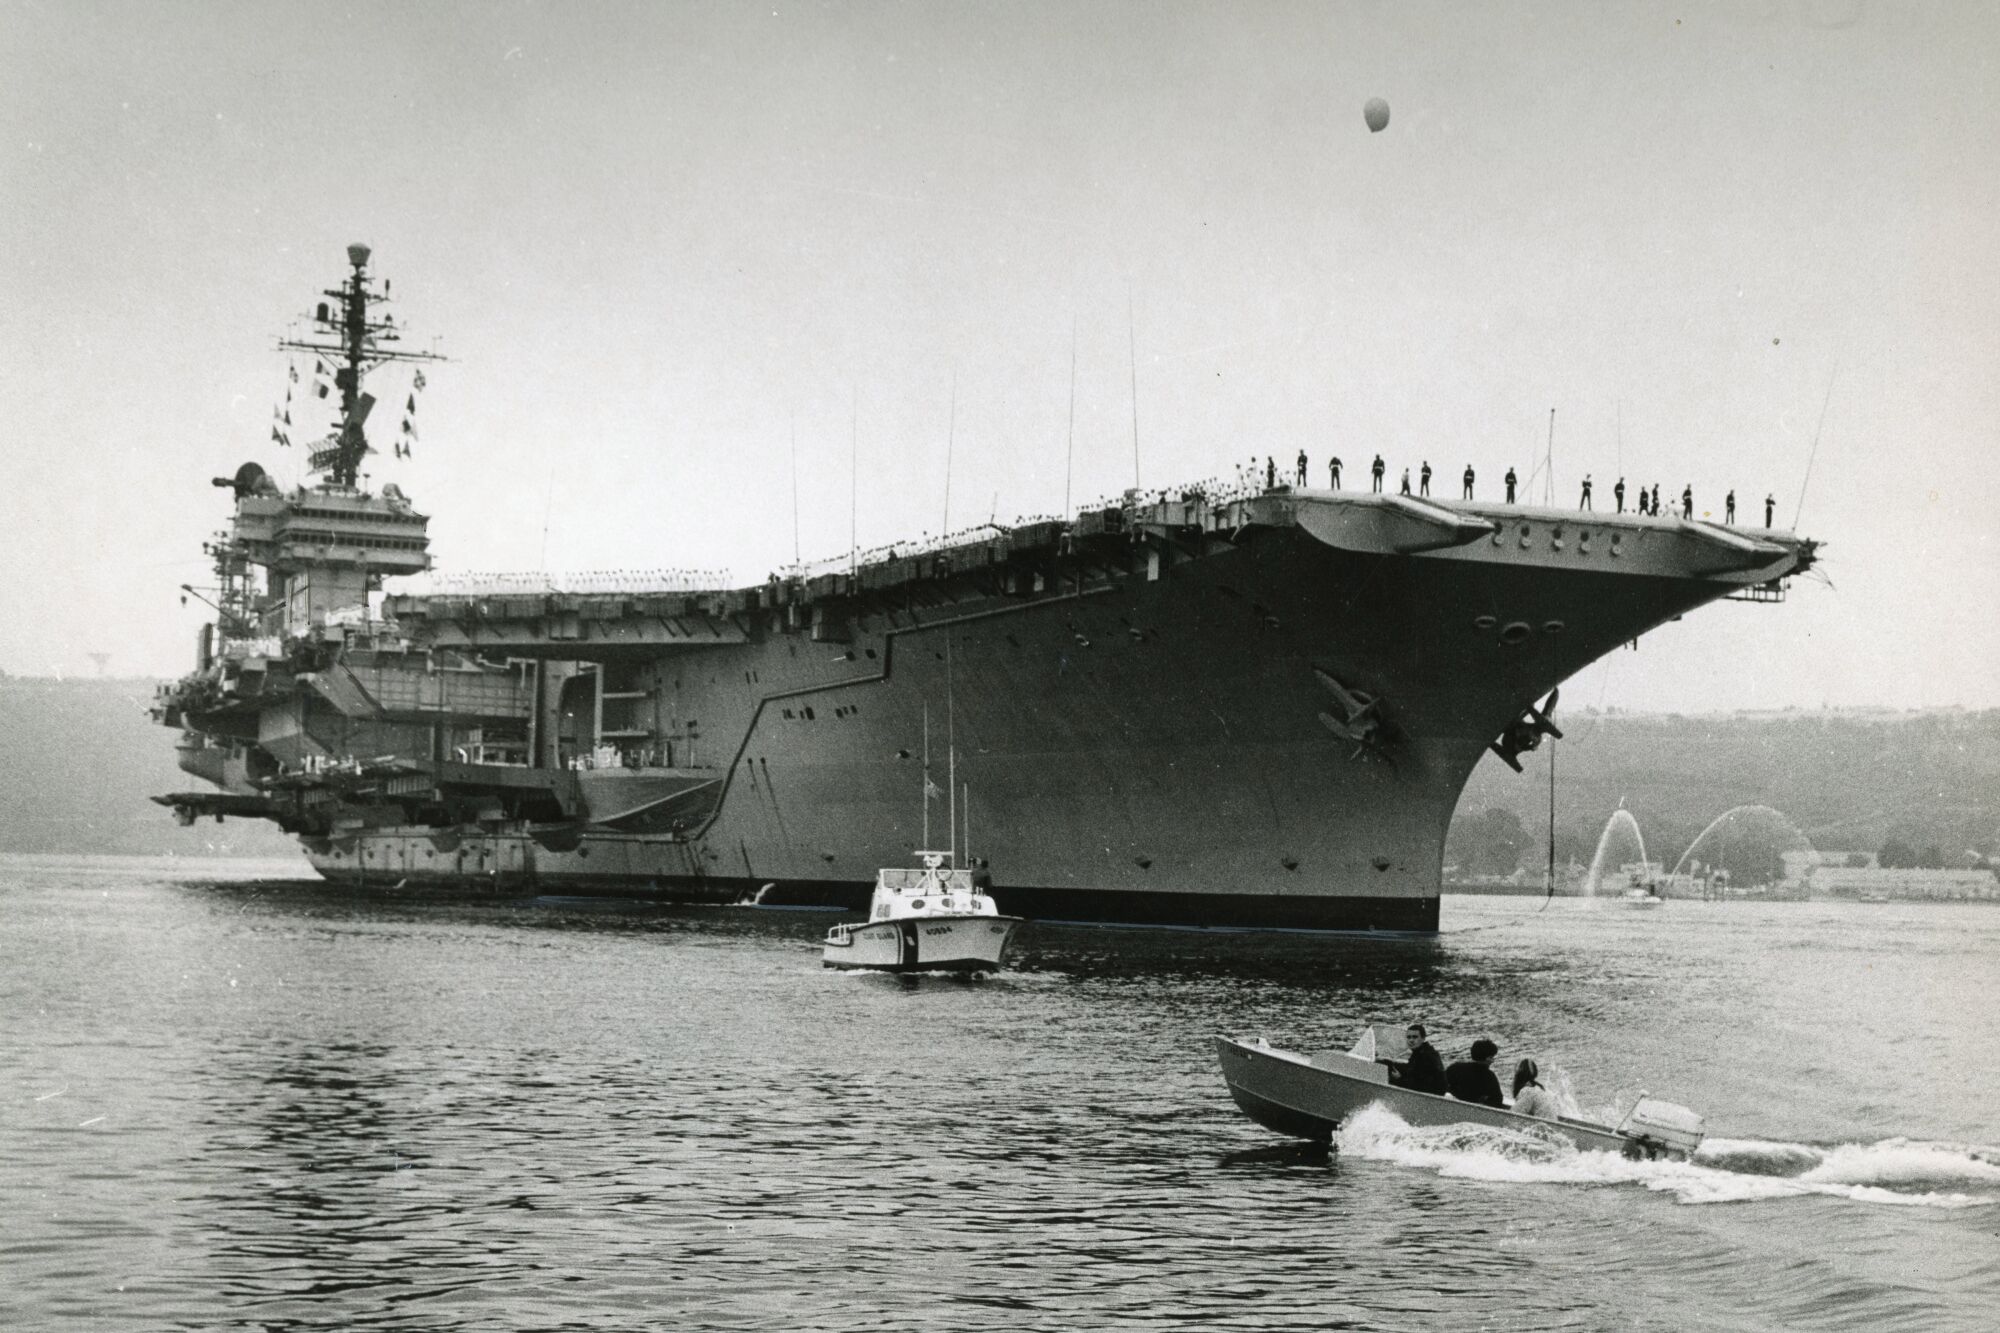 The aircraft carrier Kitty Hawk eases past Point Loma as an outboard motorboat roars beneath her bow in 1968.